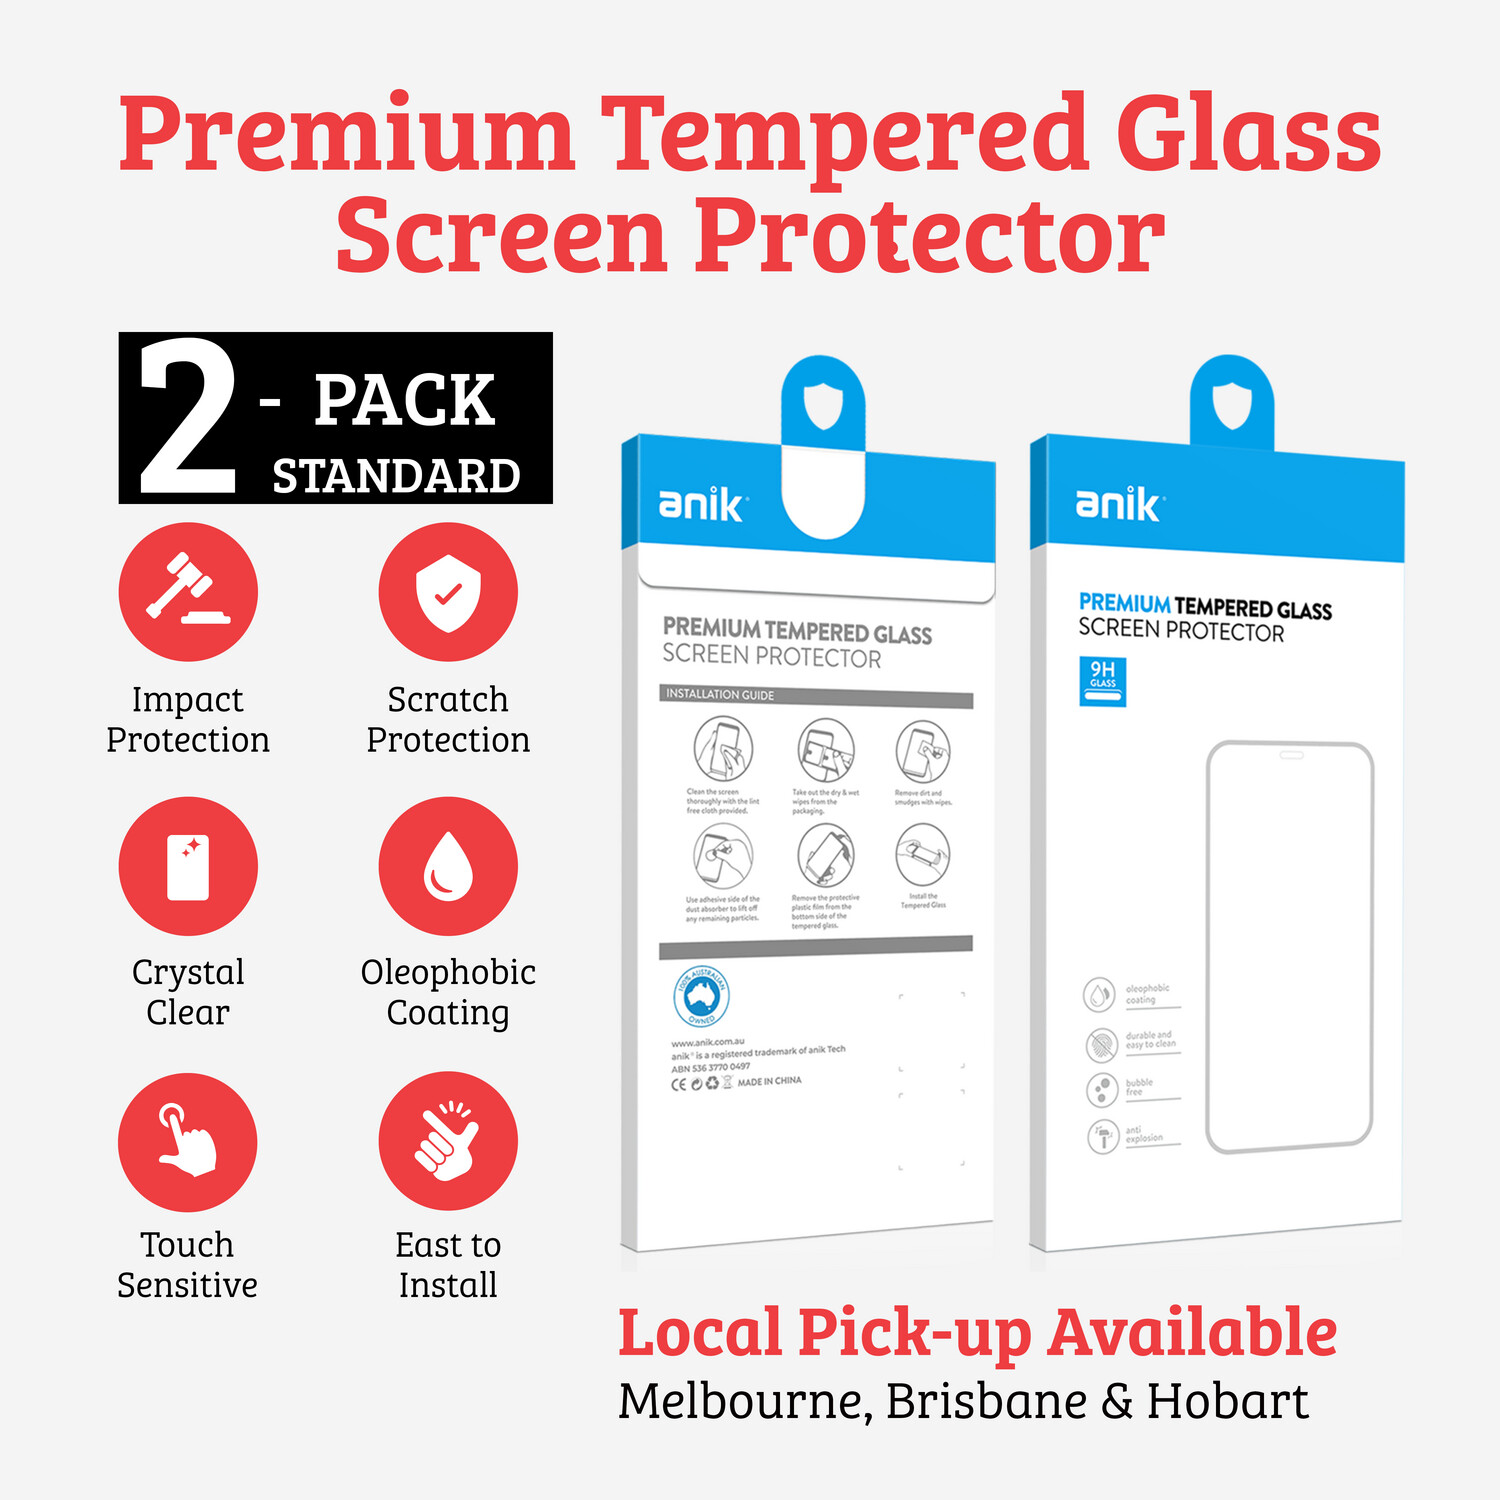 ANIK Premium Standard Tempered Glass Screen Protector for iPhone 11 Pro Max [2 Pack]